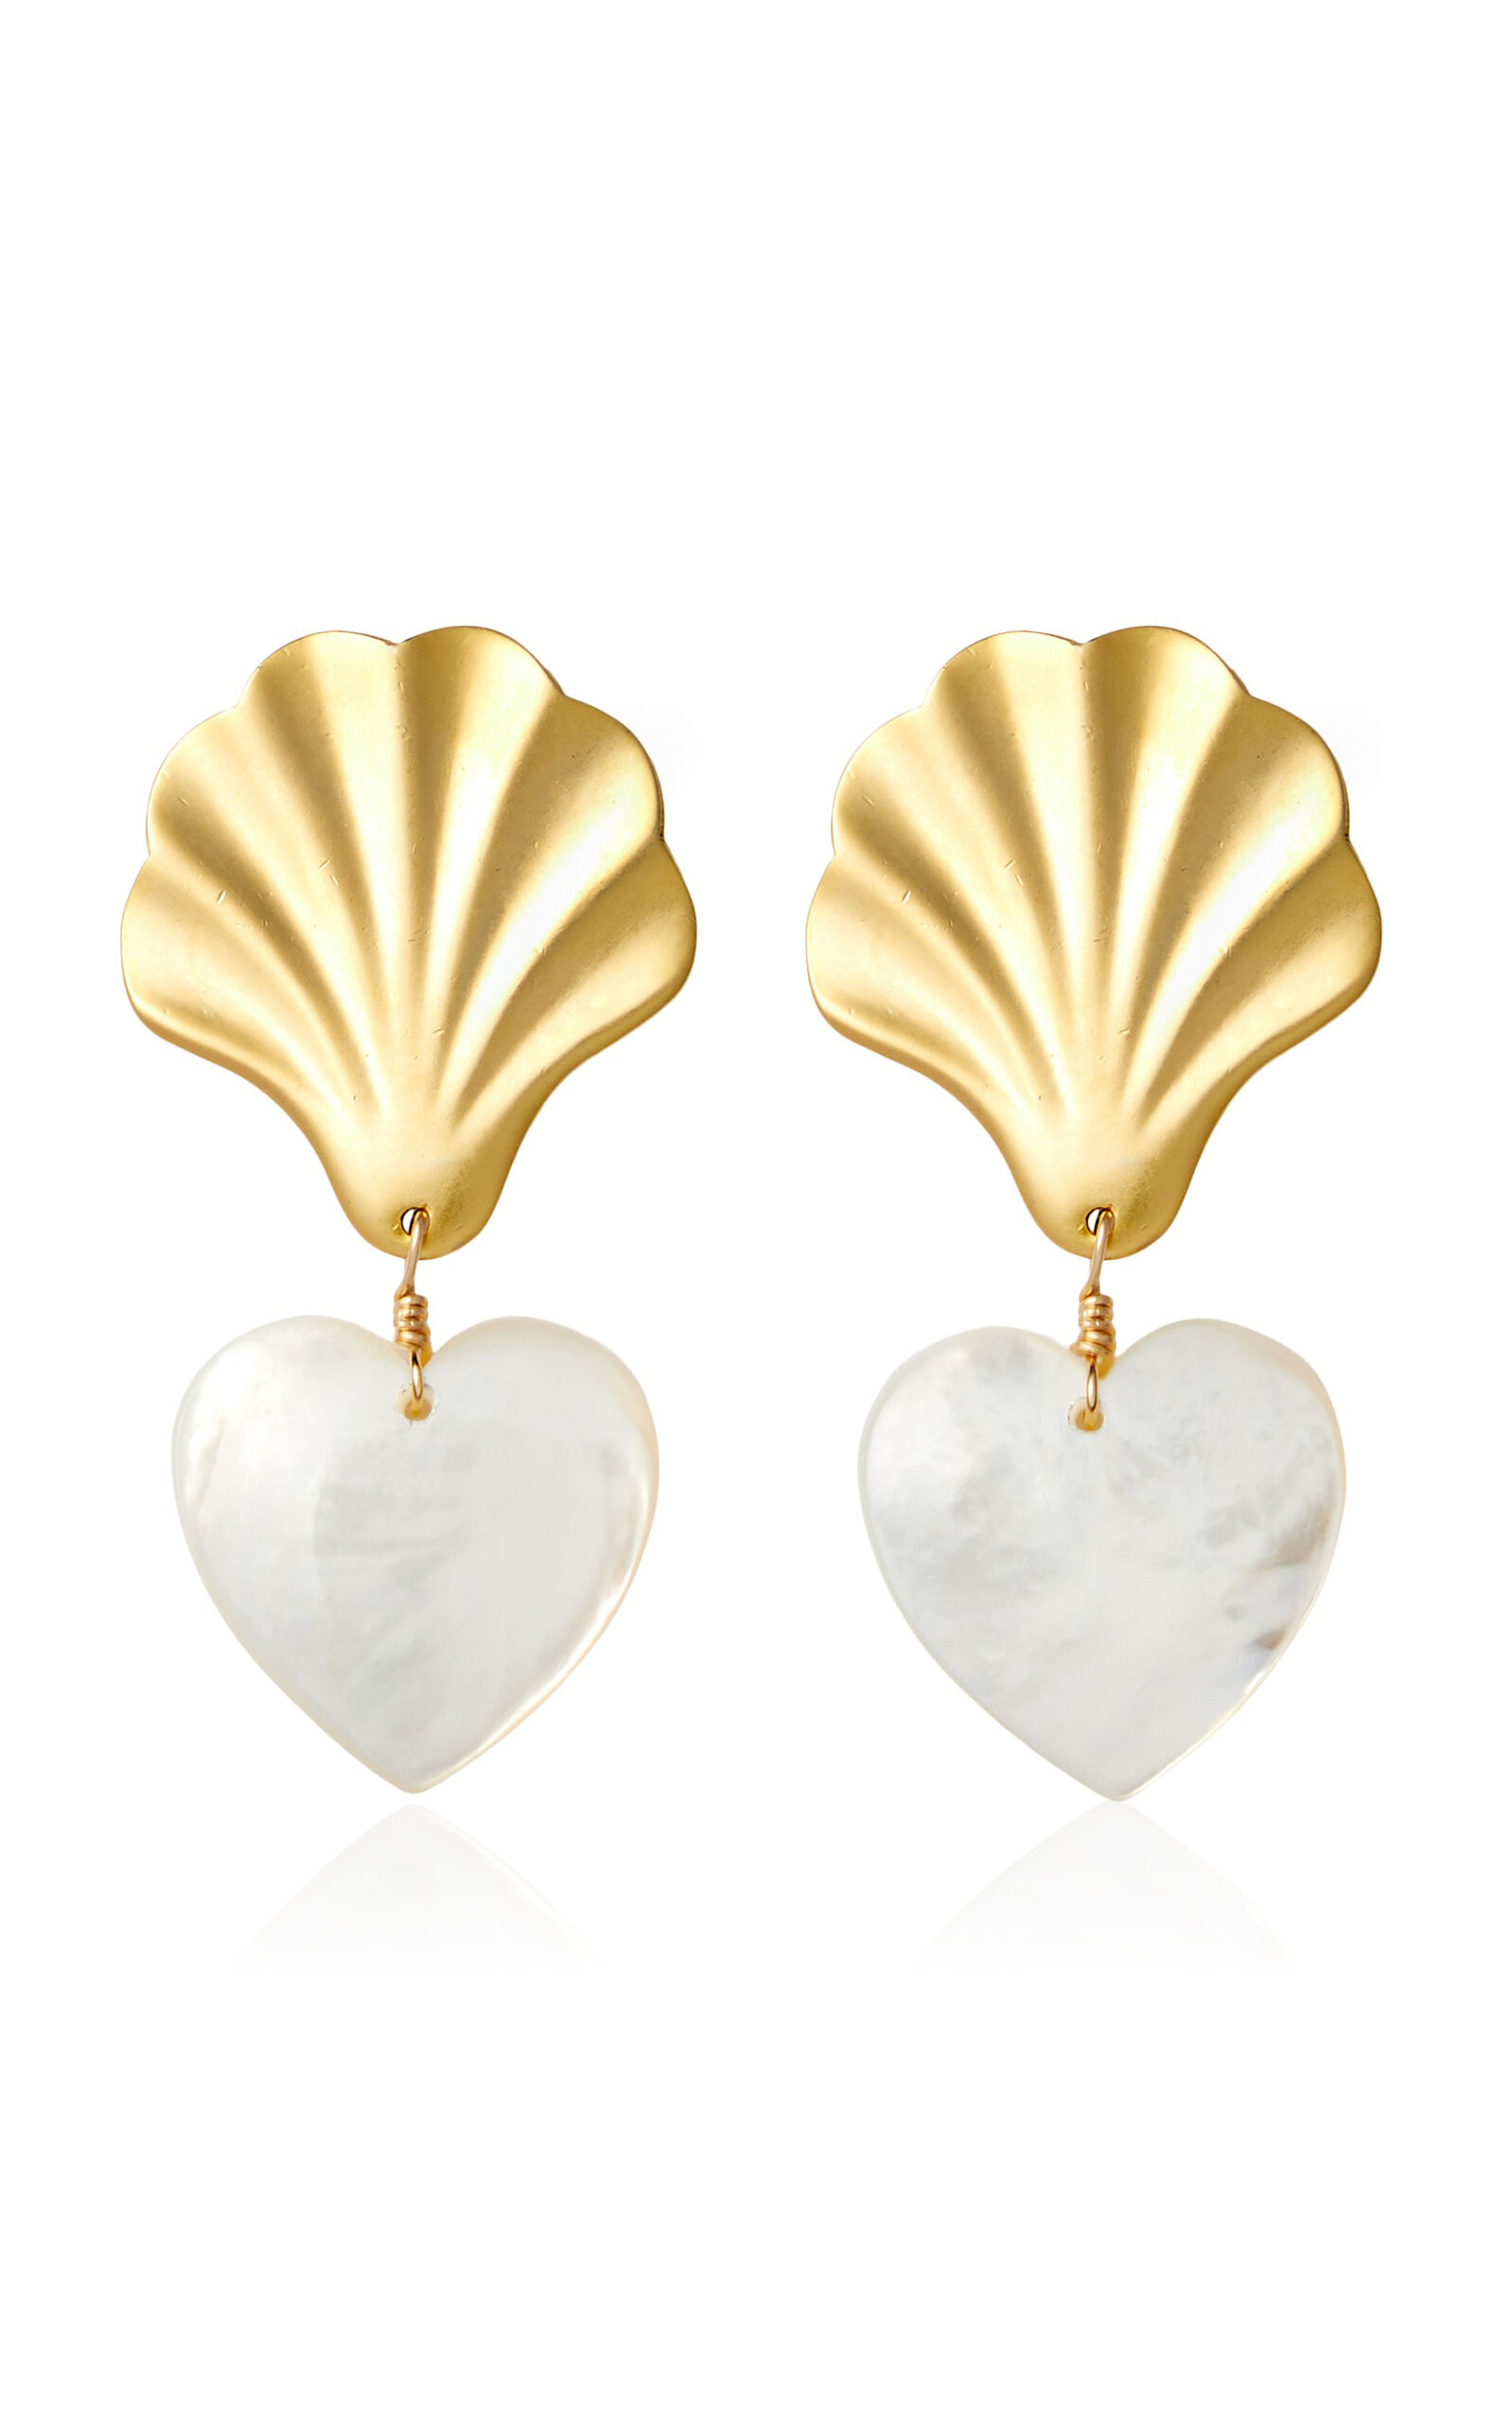 Busy Mother-of-Pearl 24K Gold-Plated Earrings